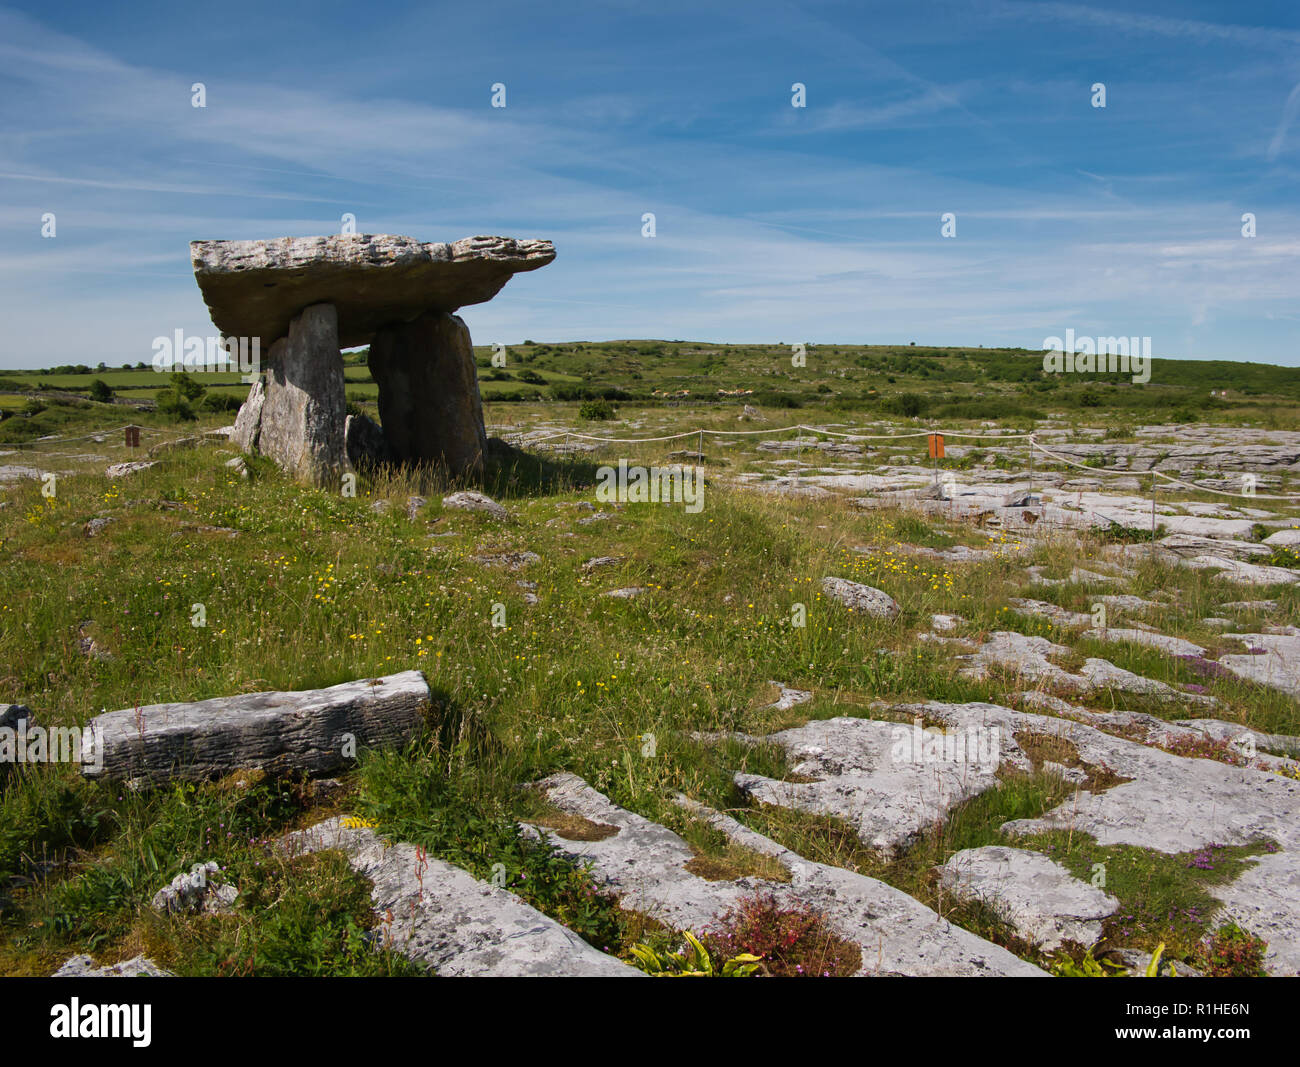 A portal tomb made of rocks near Poulnabrone in Ireland in fine weather Stock Photo